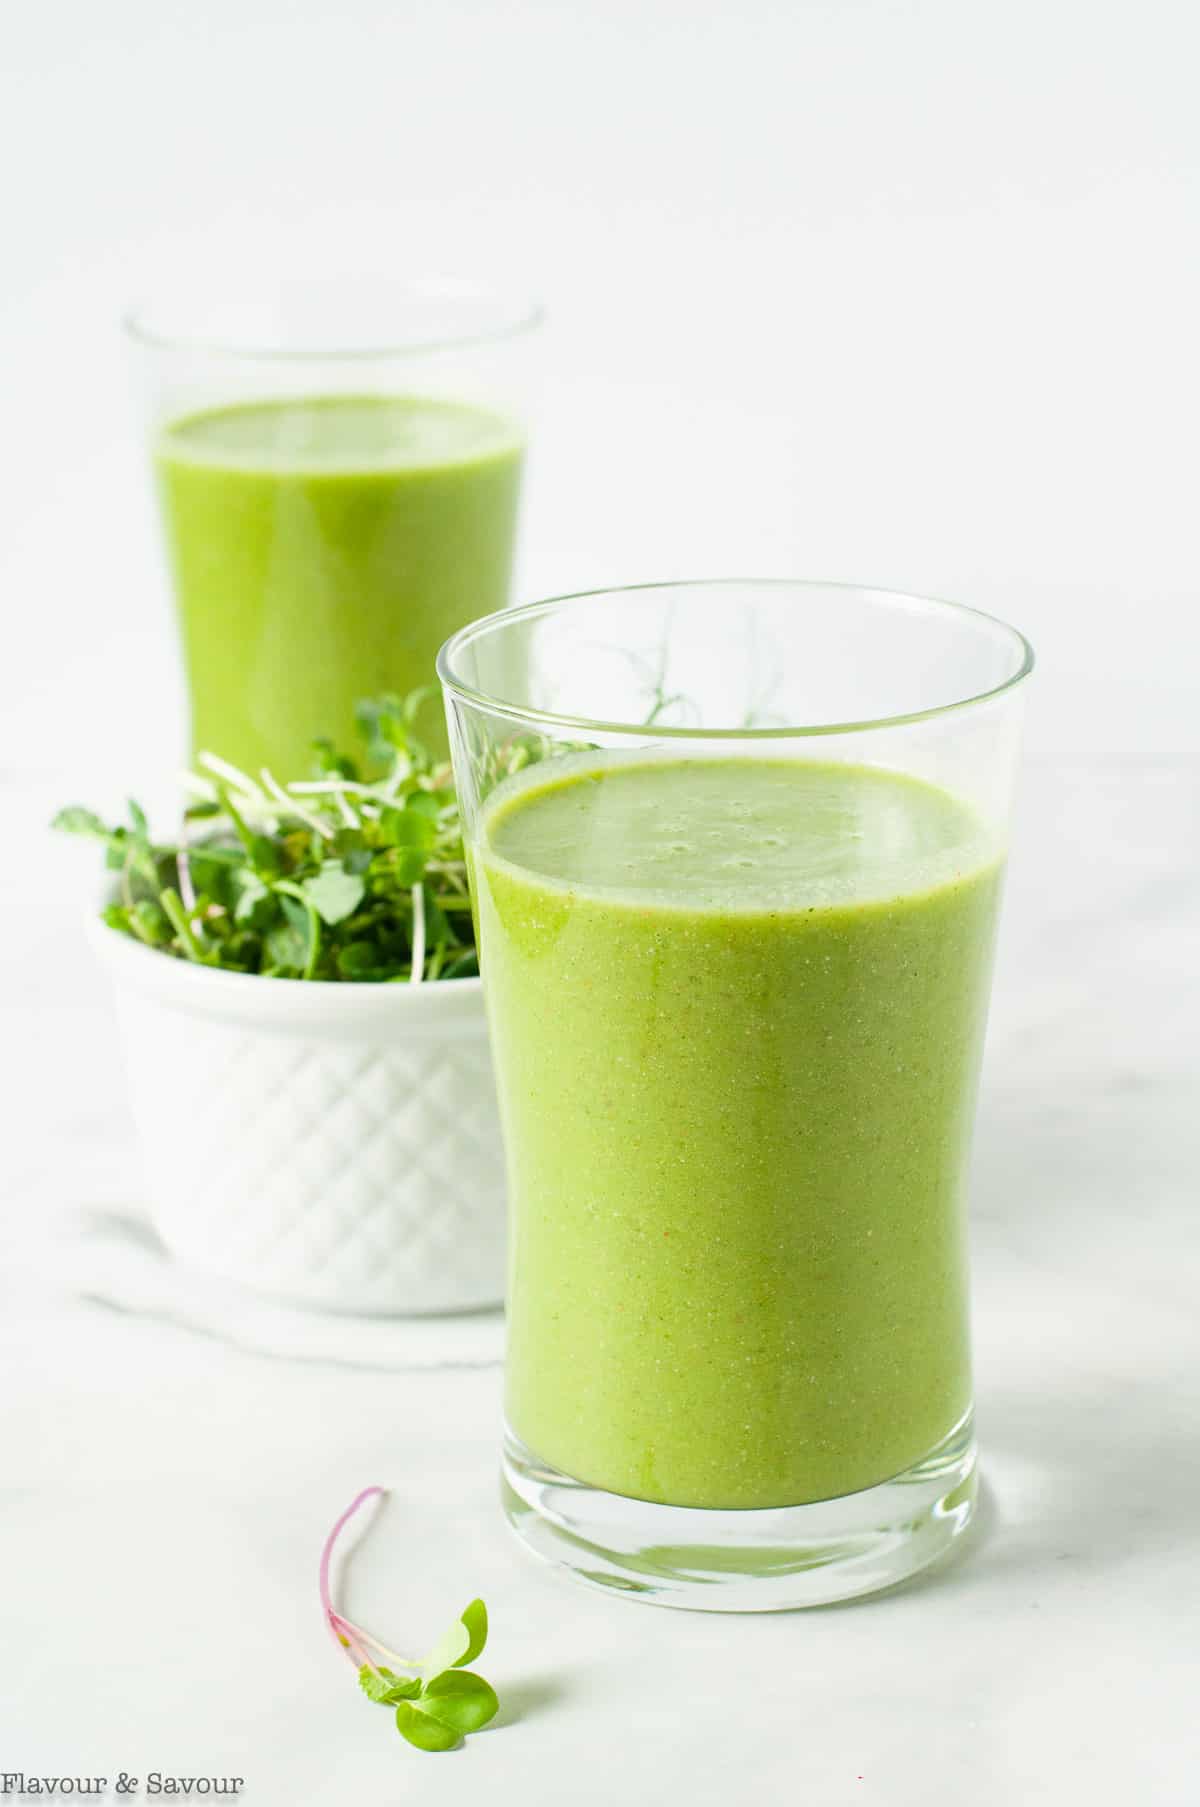 Two glasses of pineapple orange green smoothie with a small bowl of microgreens, an idea for a healthy smoothie recipe